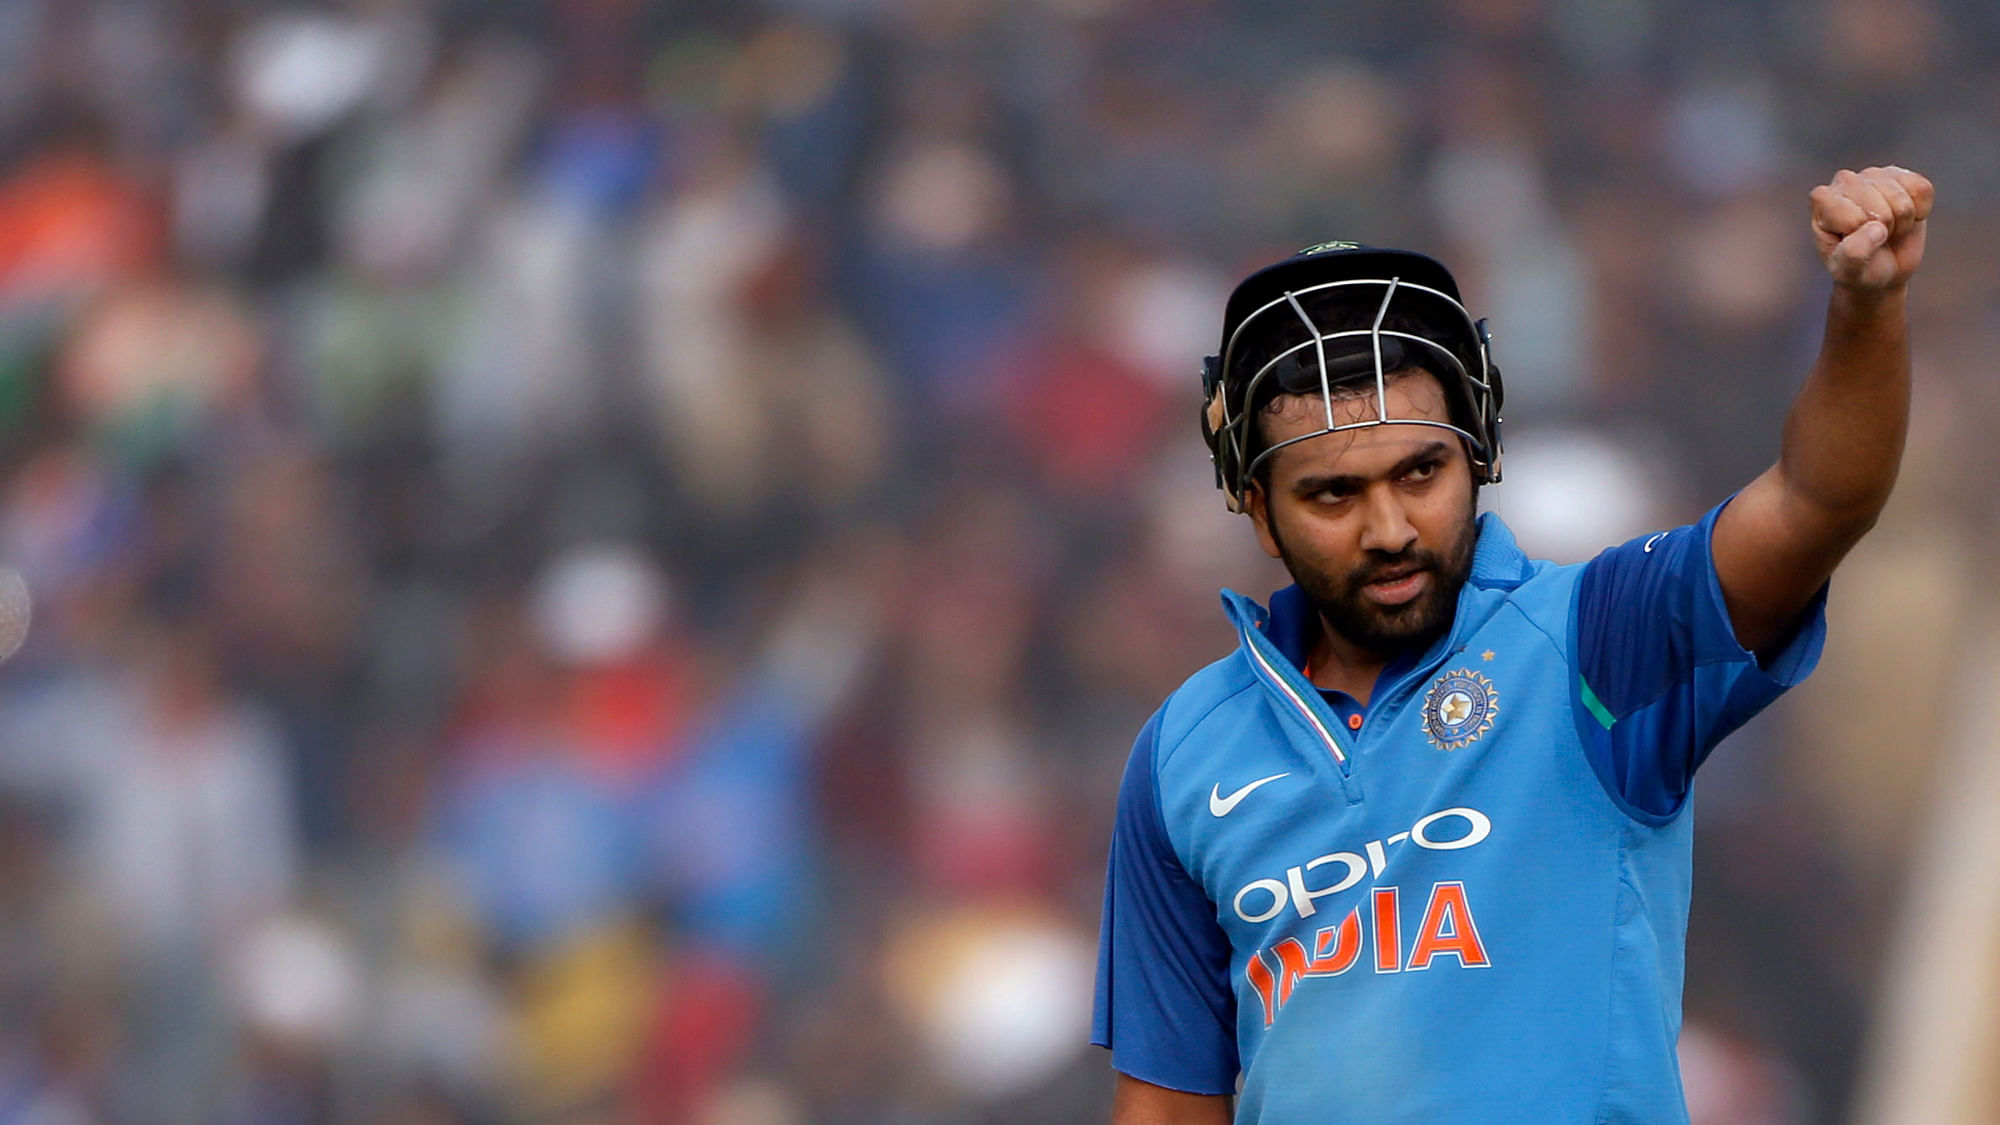 Rohit Sharma moved up two spots to fifth in the ICC ODI Rankings among batsmen after scoring his third double ton.